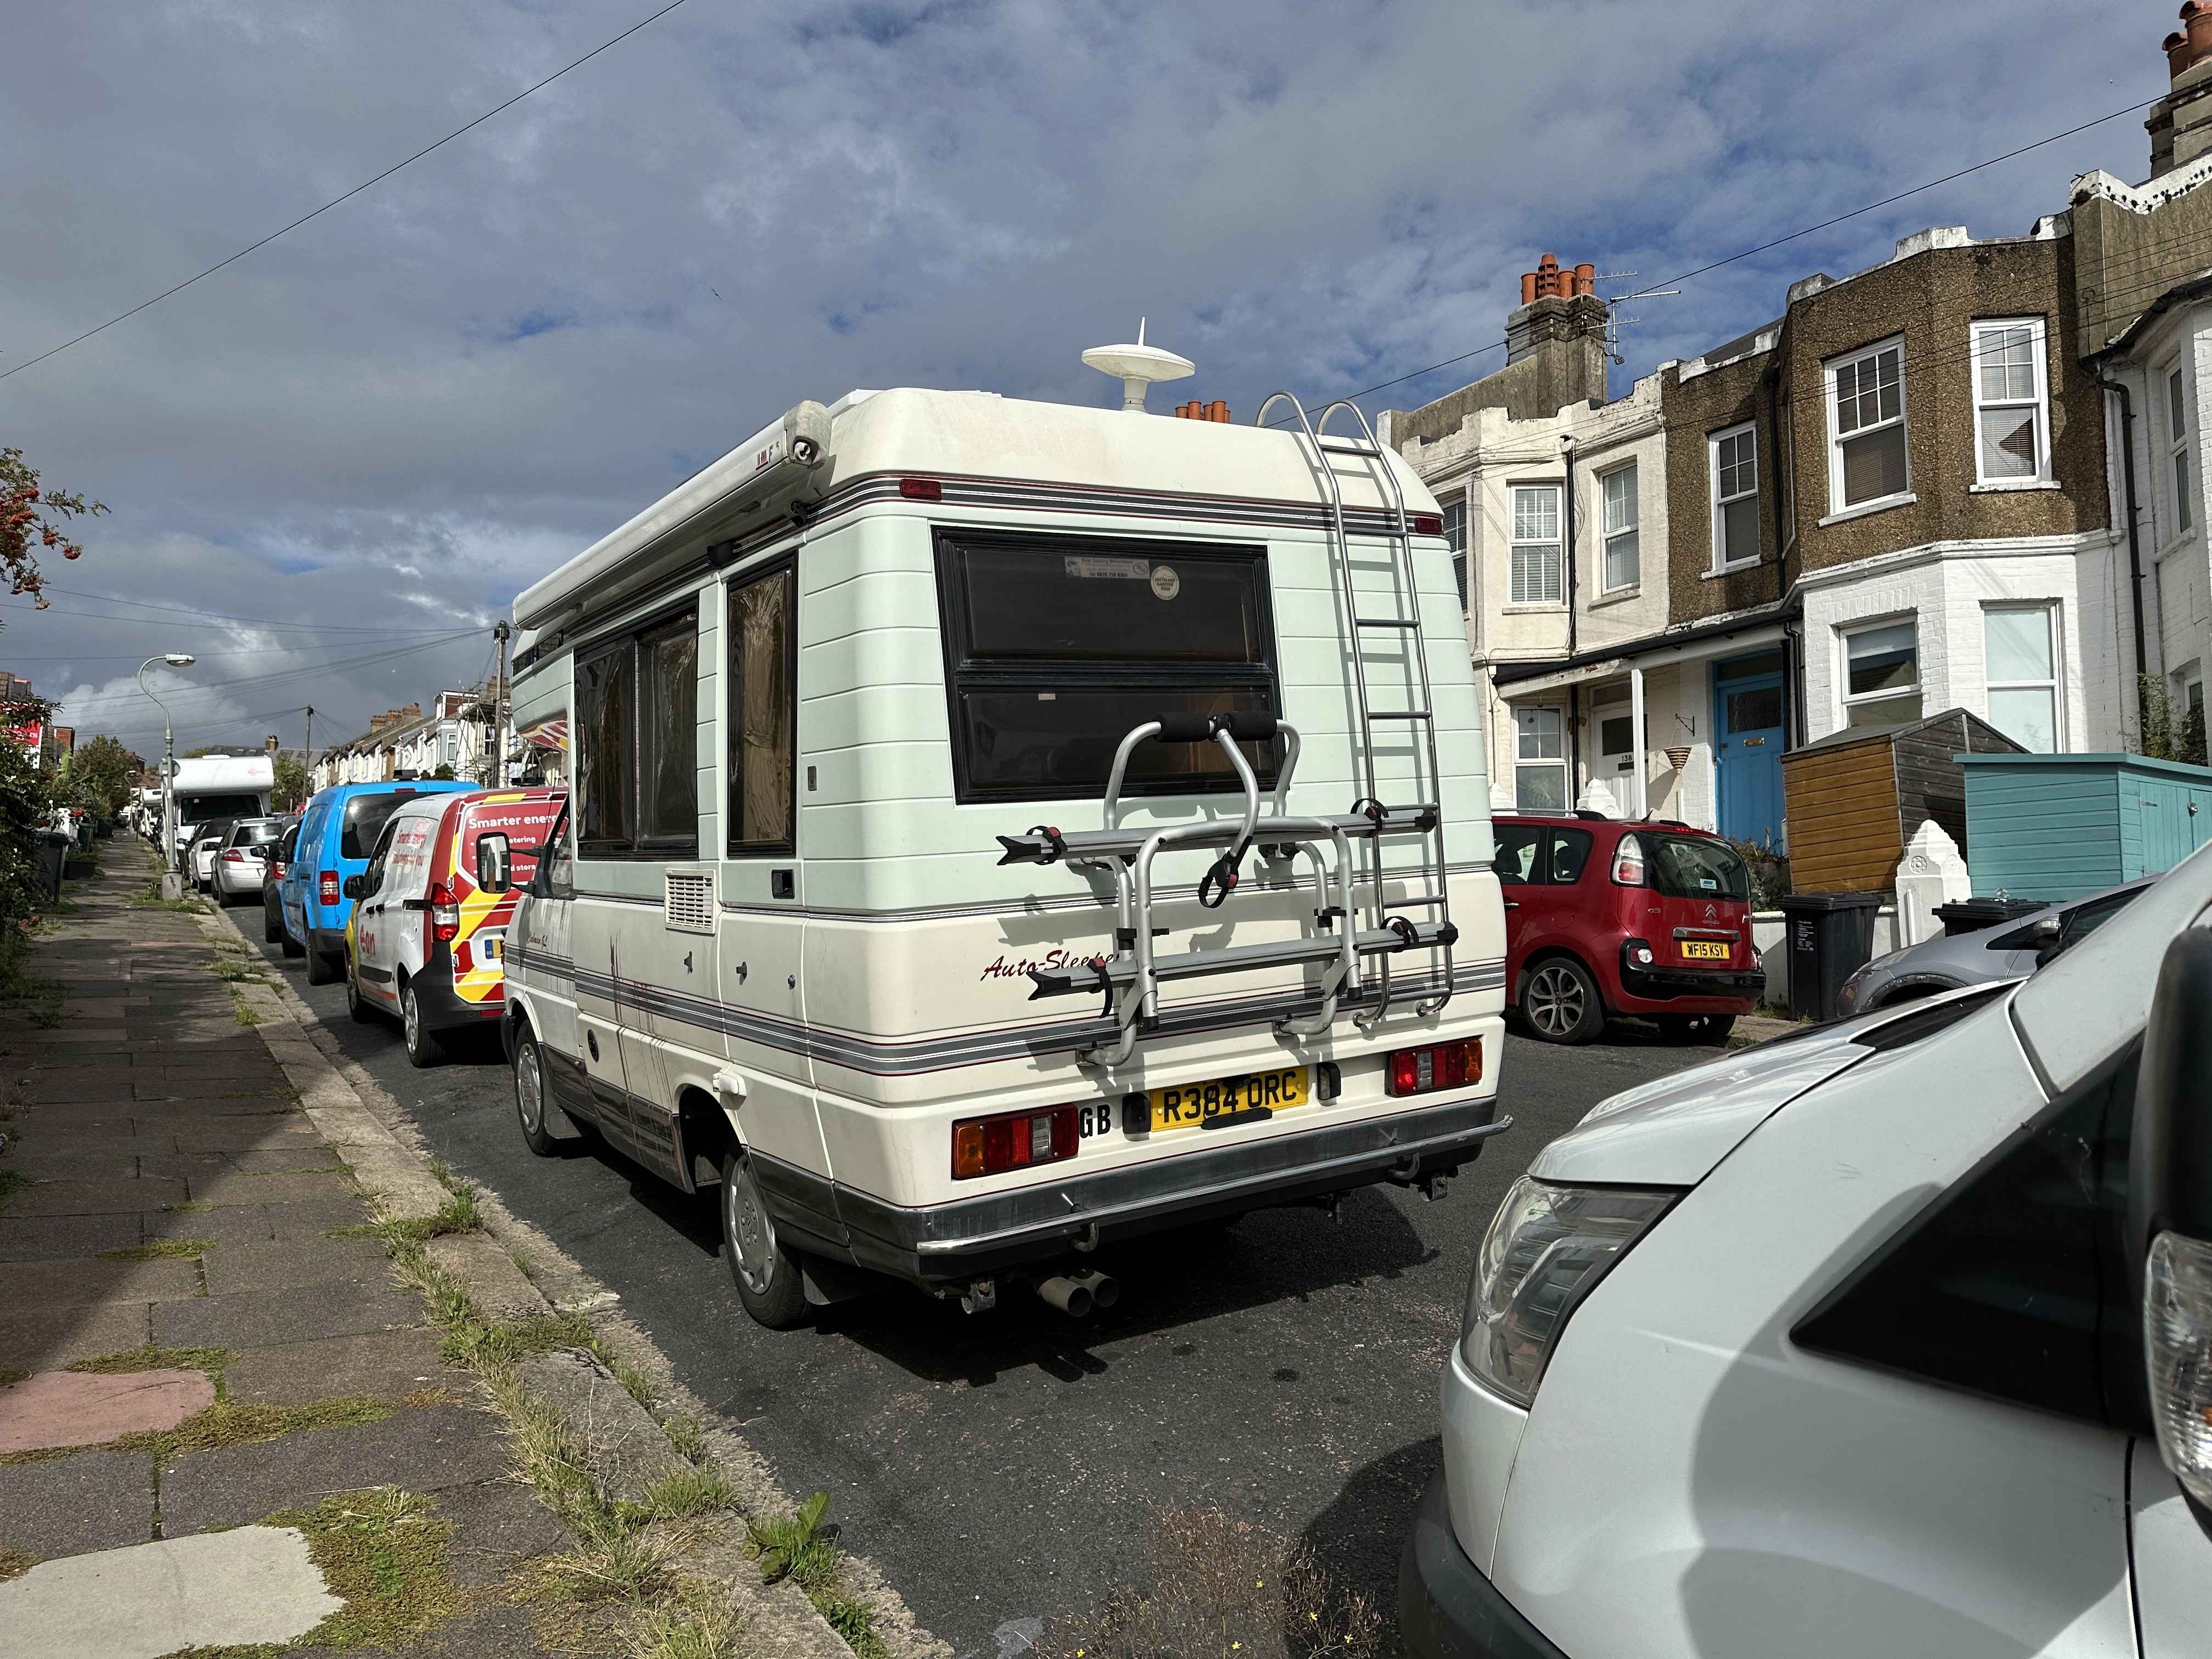 Photograph of R384 ORC - a Beige Volkswagen Transporter camper van parked in Hollingdean by a non-resident, and potentially abandoned. The sixth of twelve photographs supplied by the residents of Hollingdean.